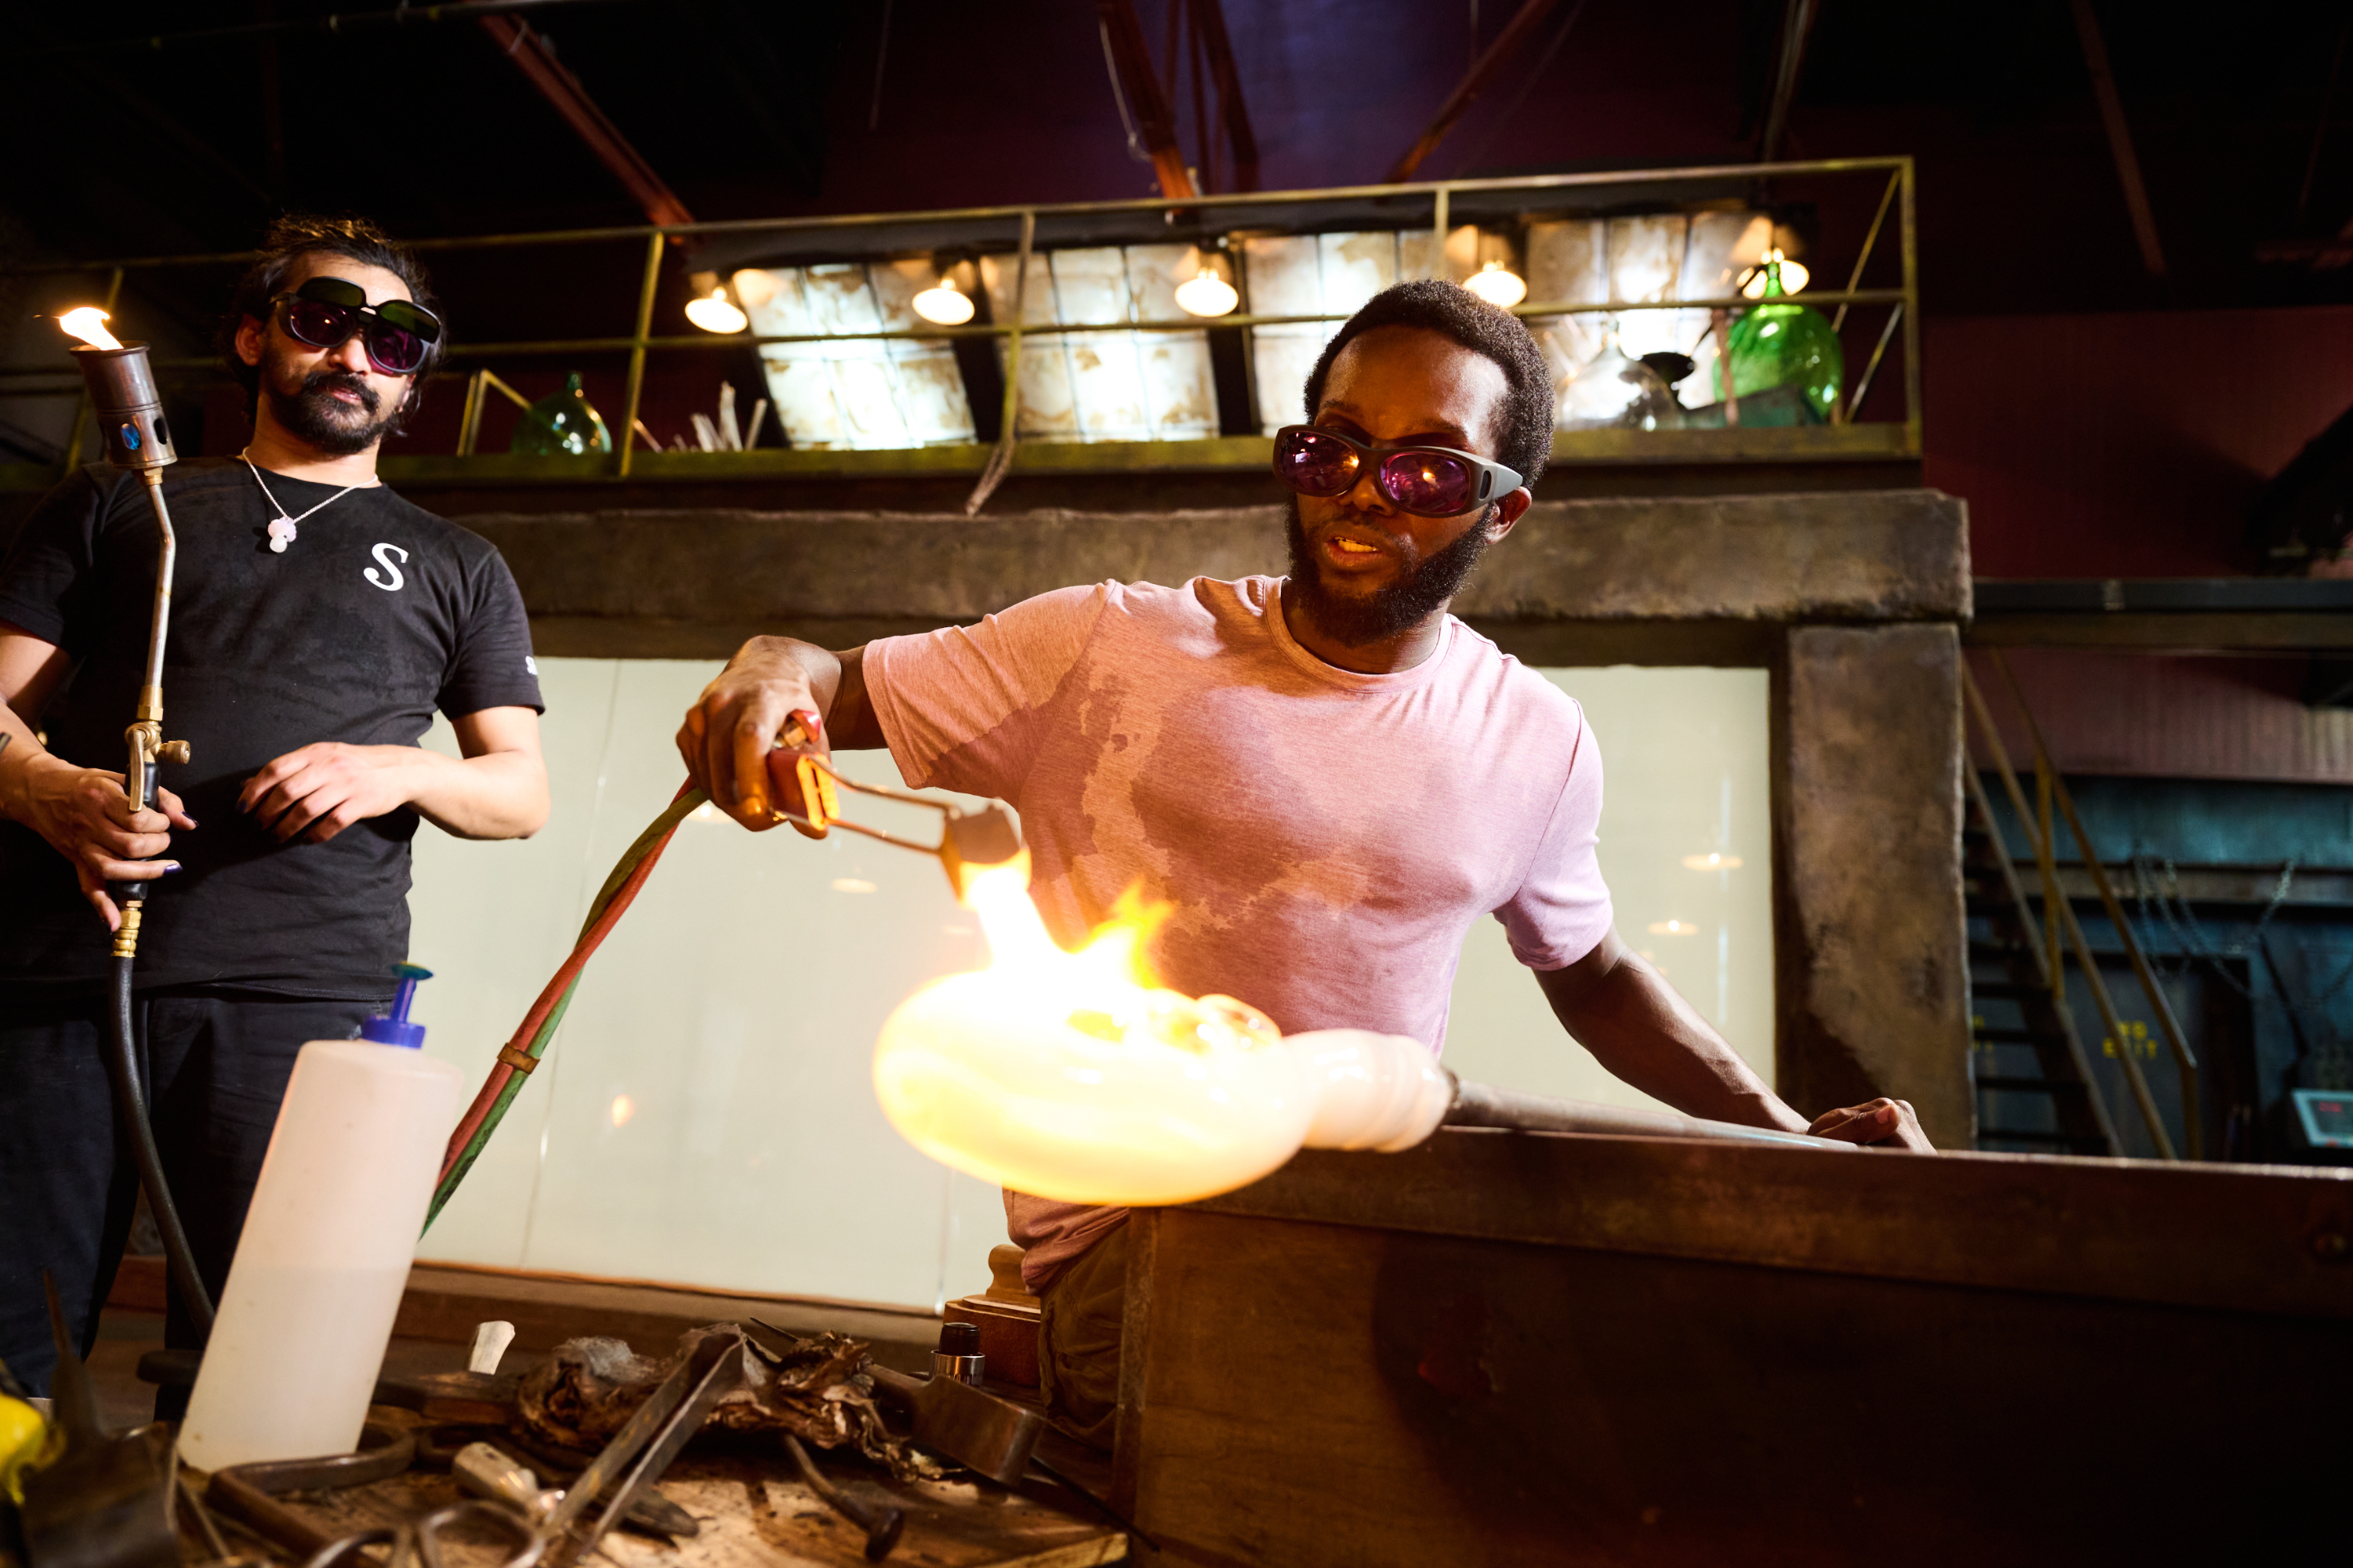 Two people working with molten glass in a glassblowing workshop